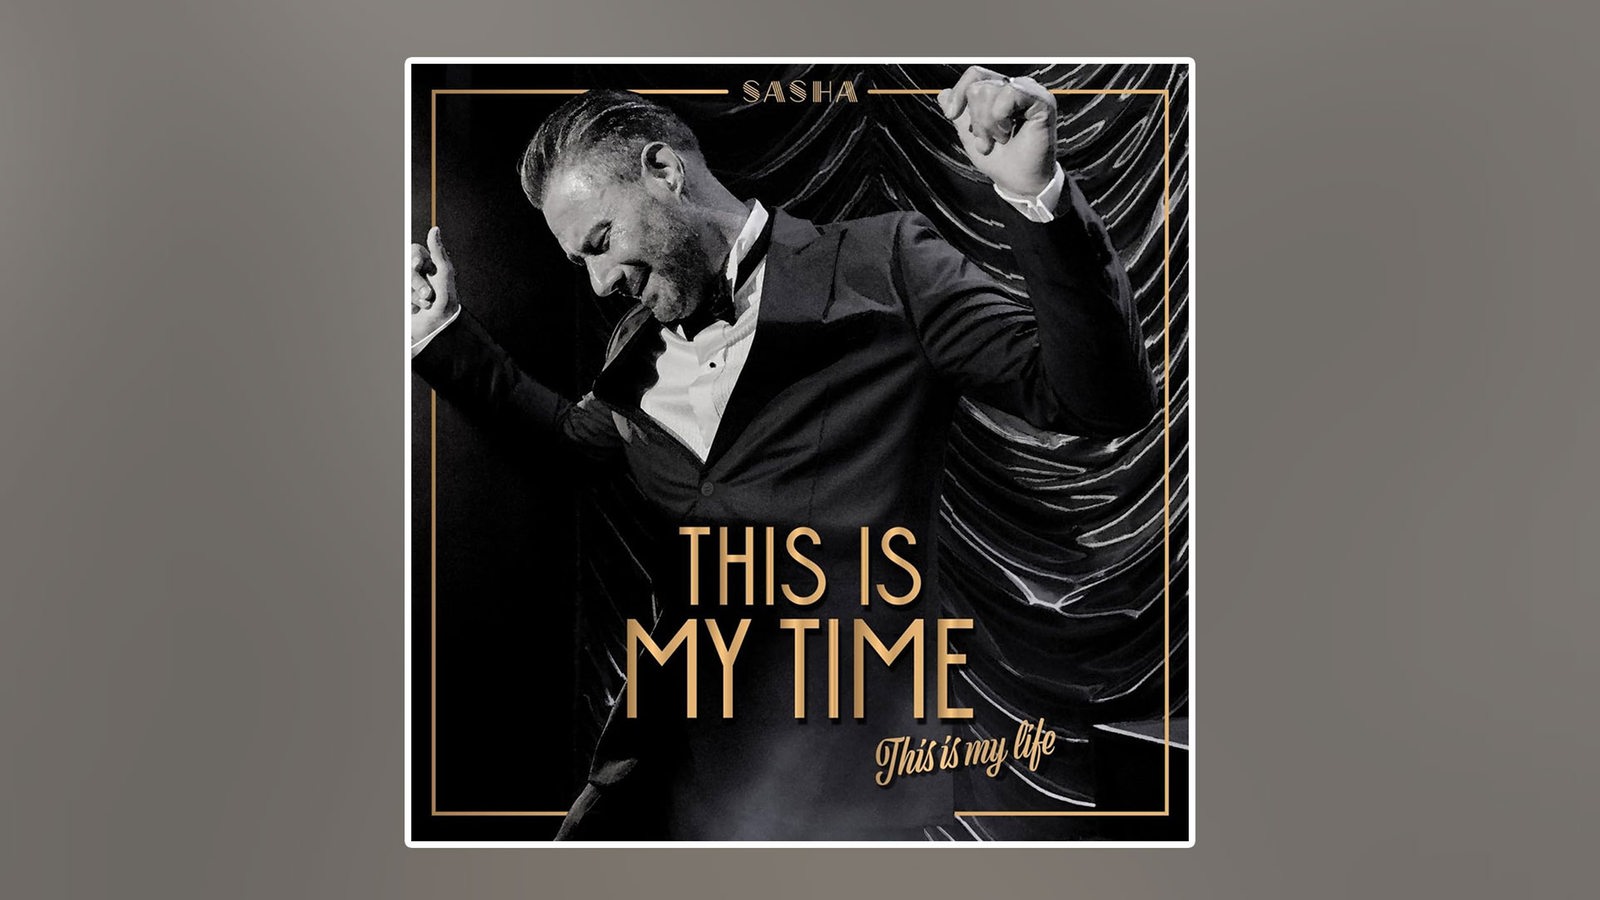 Albumcover Sasha  - This Is My Time. This Is My Life